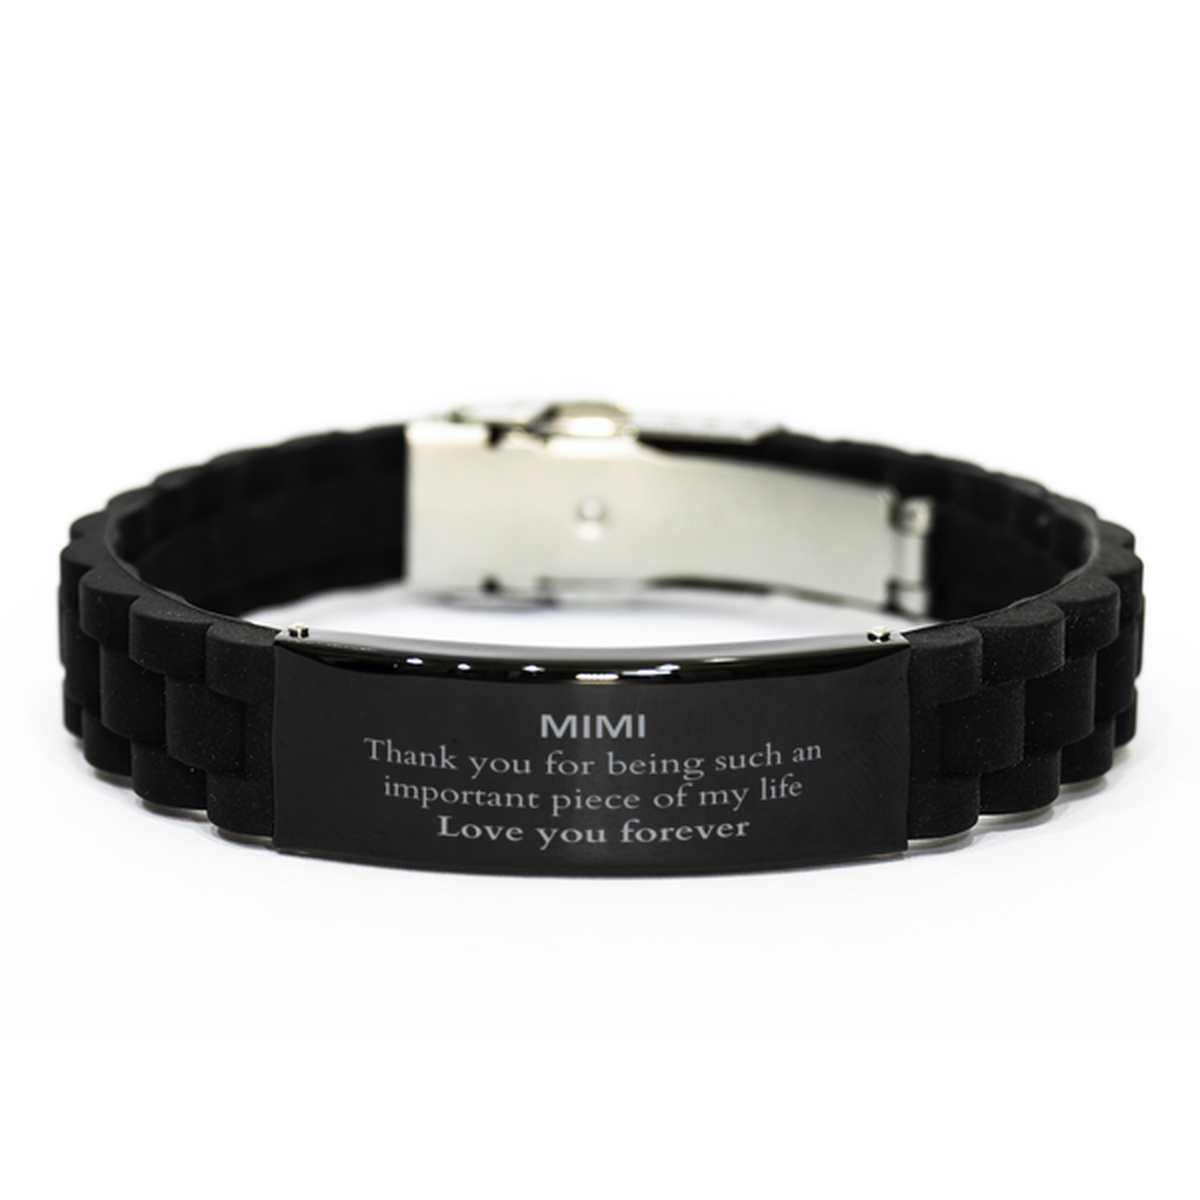 Appropriate Mimi Black Glidelock Clasp Bracelet Epic Birthday Gifts for Mimi Thank you for being such an important piece of my life Mimi Christmas Mothers Fathers Day